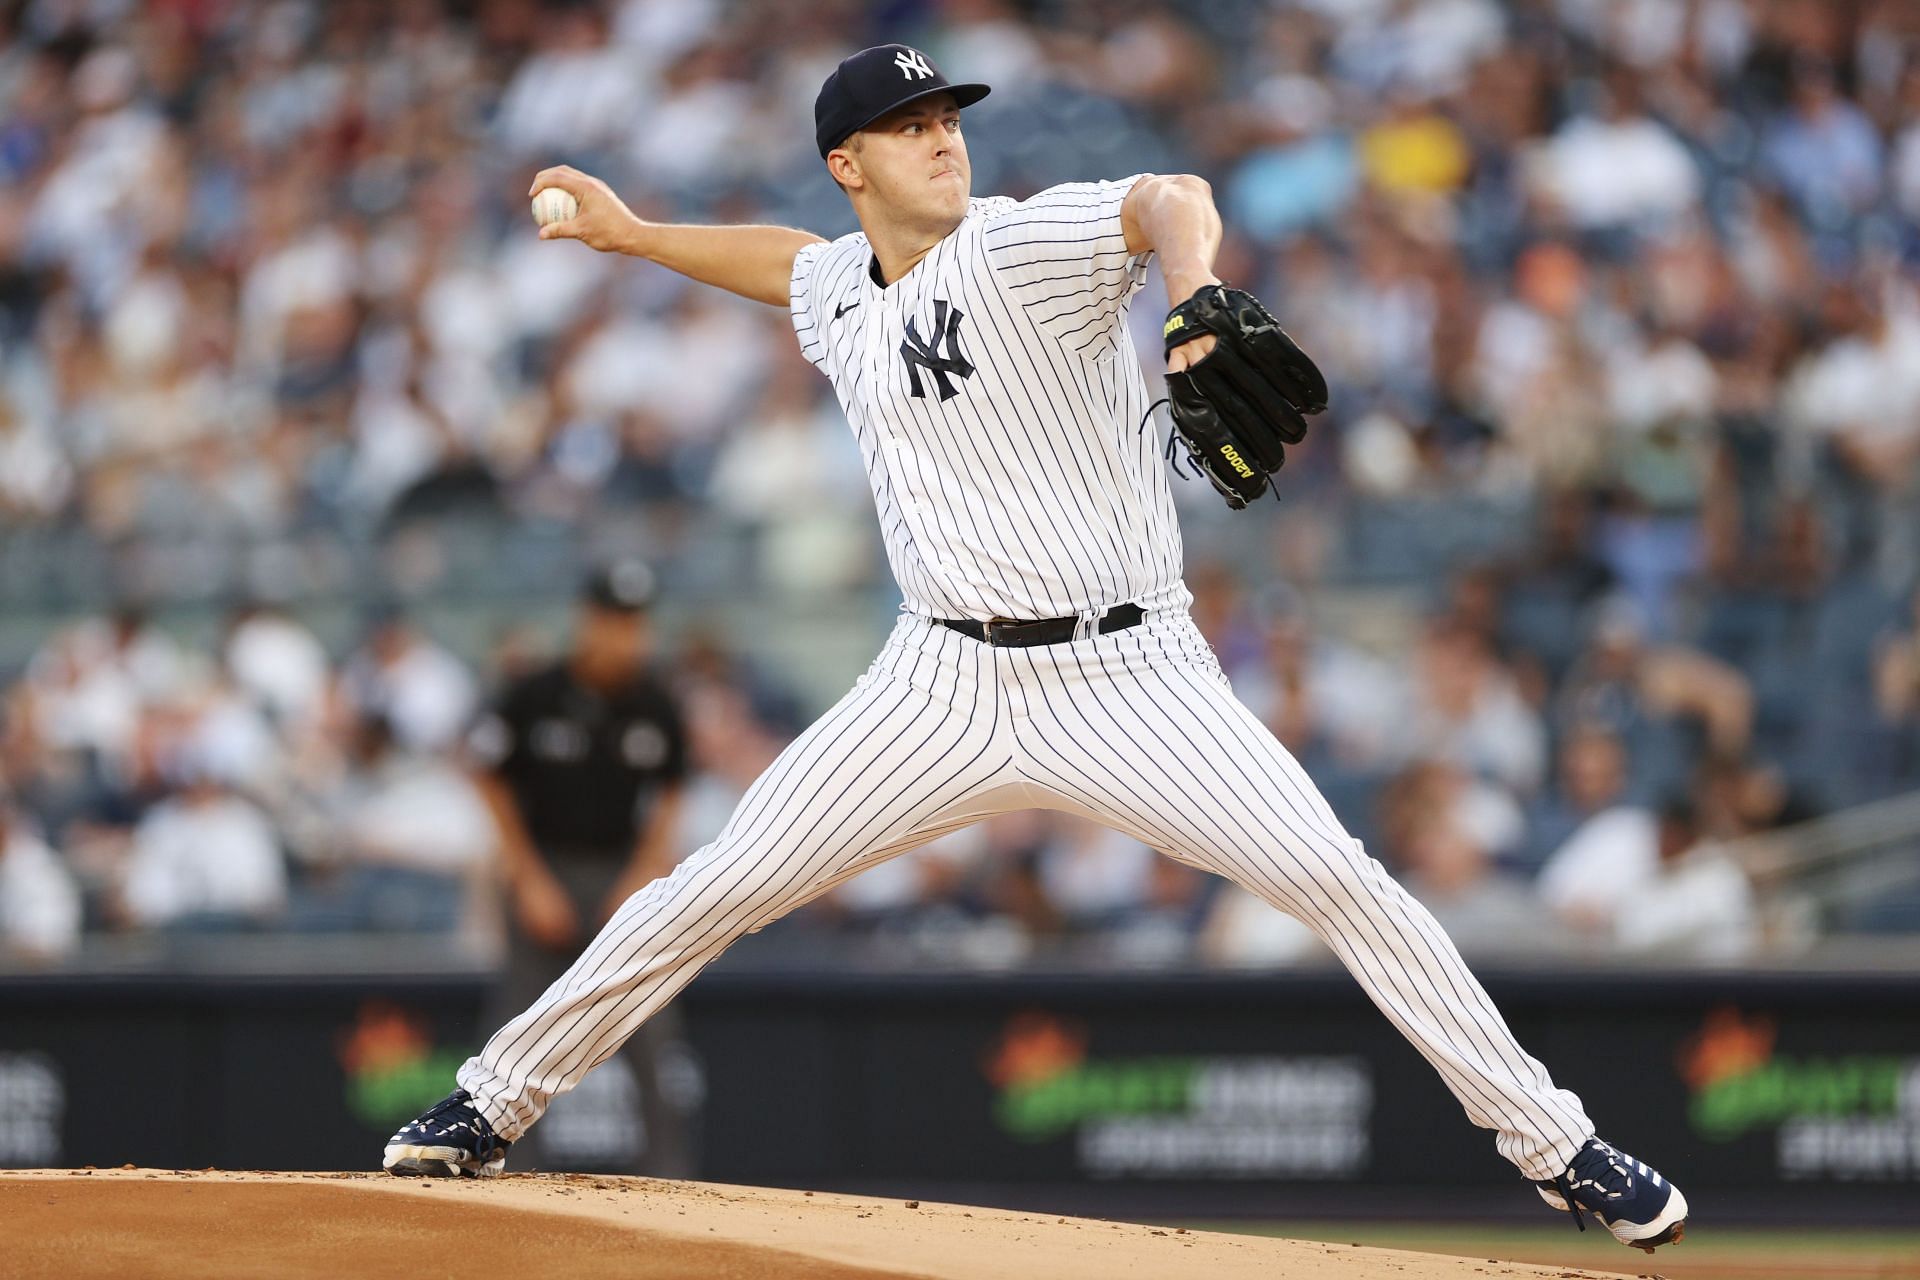 Jameson Taillon pitches during the first inning against the Toronto Blue Jays at Yankee Stadium.